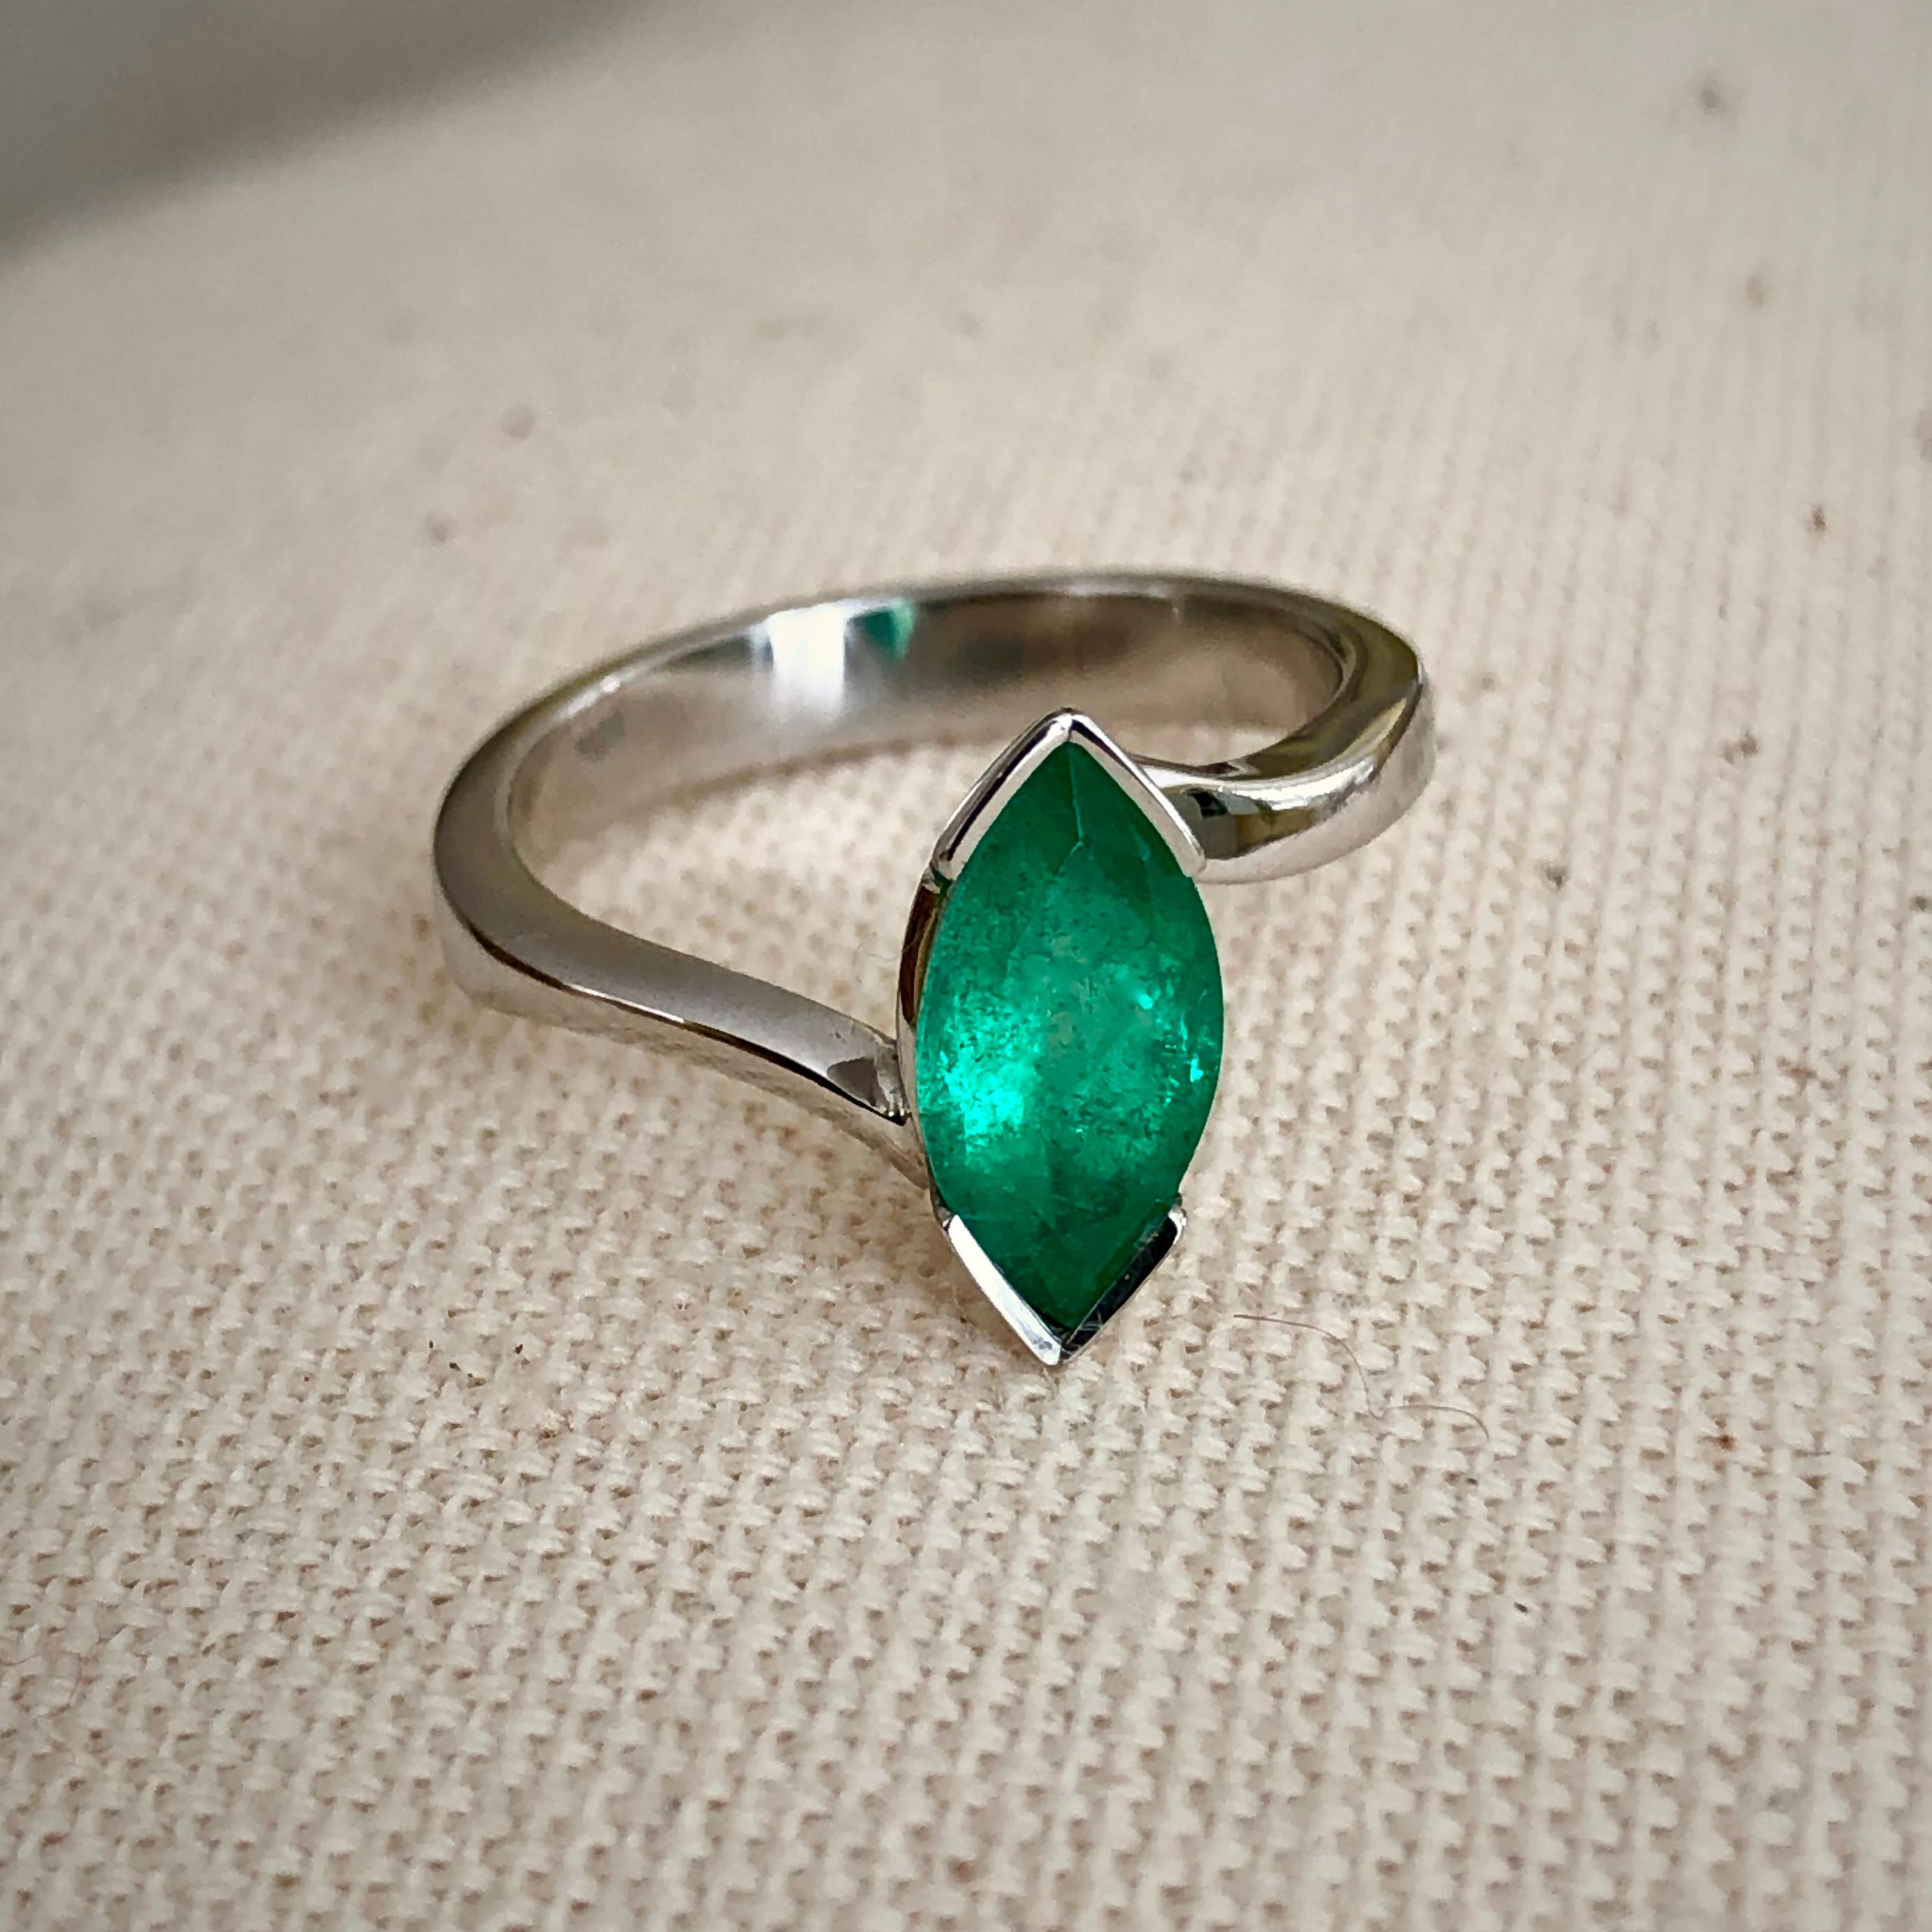 
Classic Solitaire Colombian Emerald Solitaire Engagement Ring 18 Karat White Gold
Vibrant green color Approx. 1.30 carat natural Colombian emerald marquise cut embedded in 18k white gold. 
Ring size is 6.75( resizable)
Total Ring Weight: 4.1g
